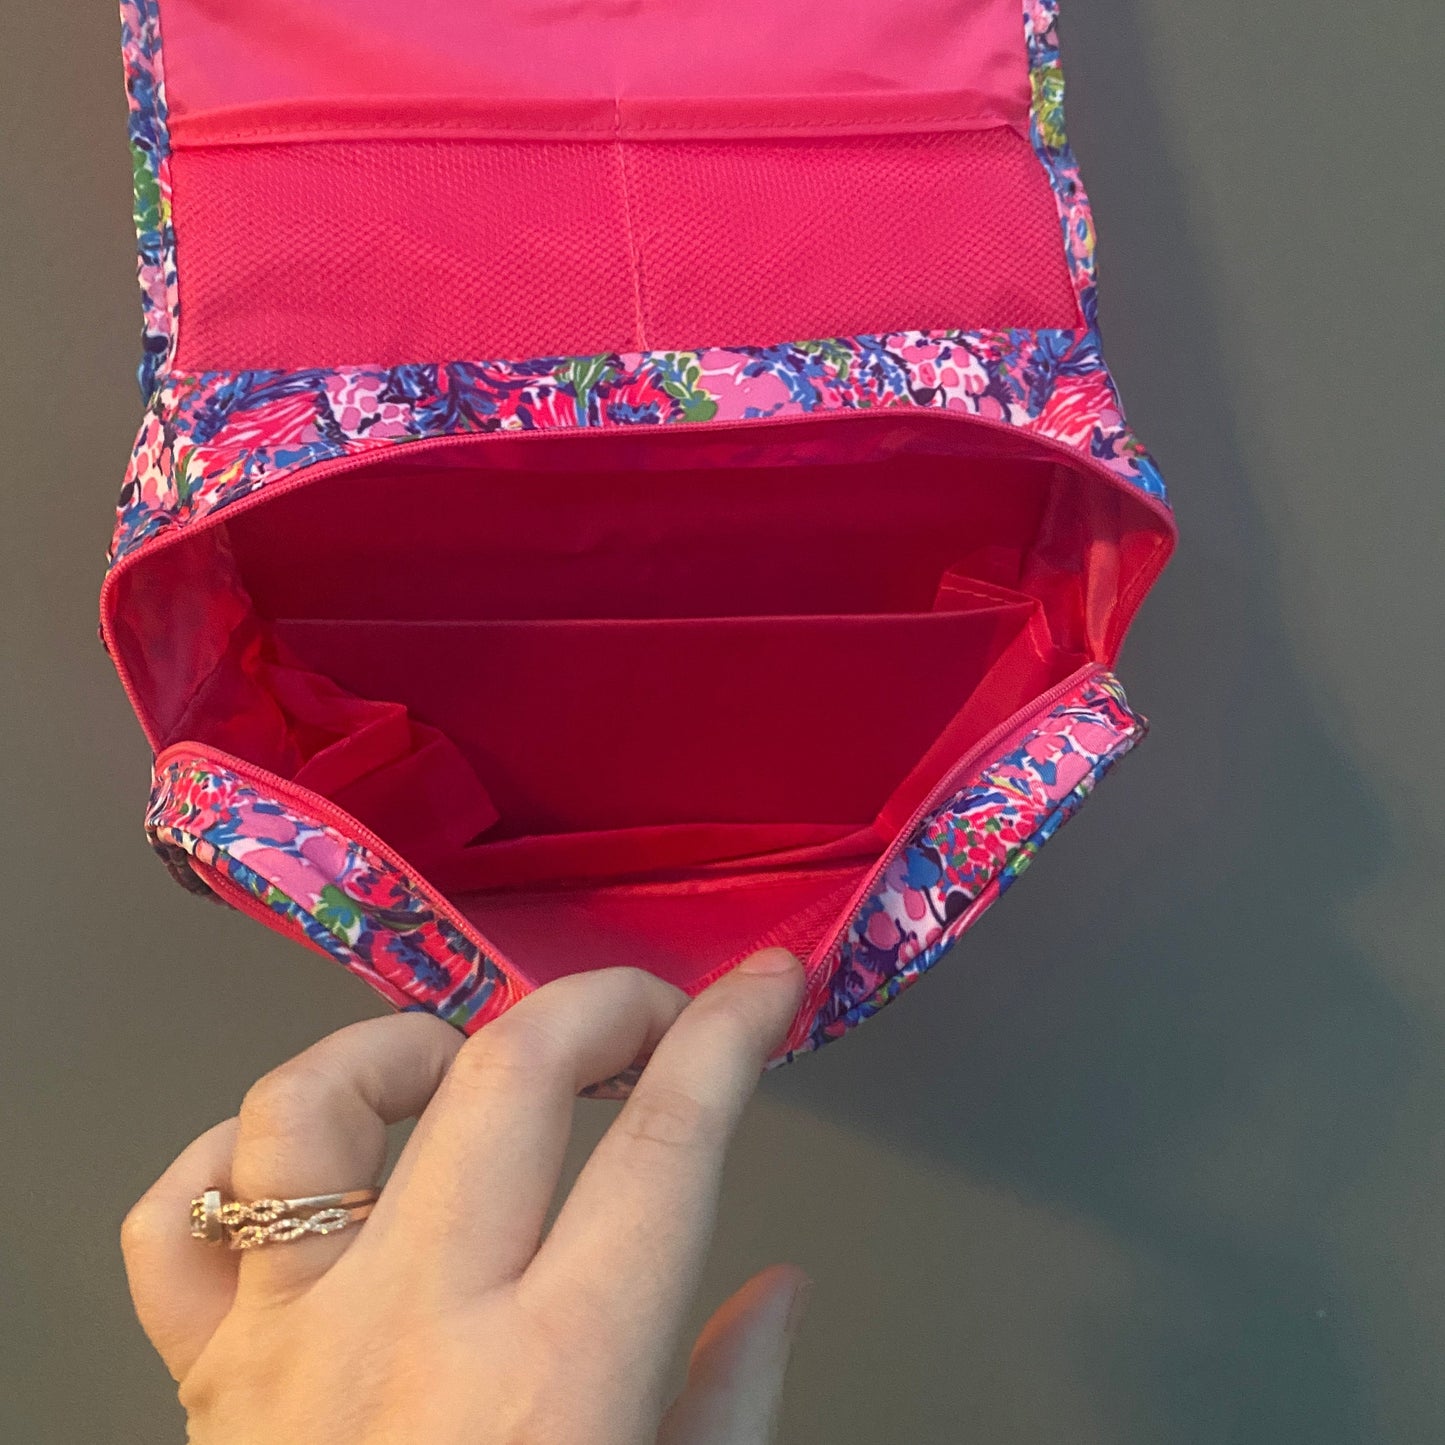 Hanging Toiletry Bag - LOCAL PICK UP OPTION